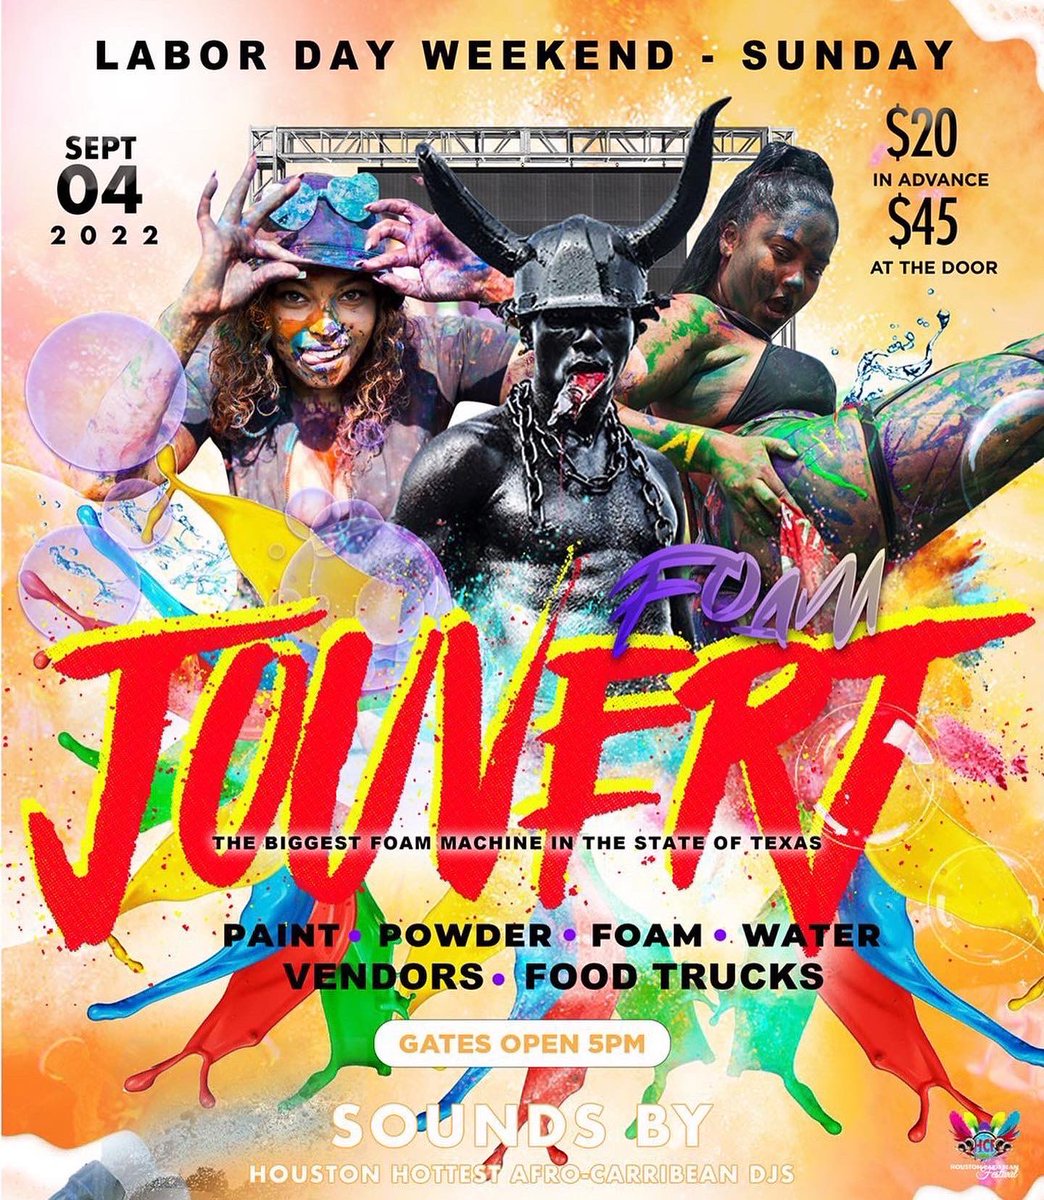 This Friday To Monday! #LabordayClassic kicking off Sept 2nd at #FreakyNasty5  then #BragginRights ending it with #FoamJouvert 🔥🔥⚡️ Link Bio for Tickets!! 
#Pvamu26 #Pv26 #Txsu26 #uh26 #Lamar26 #shsu26 #FreakyNasty5 #BragginRights #Jouvert #foamJouvert #CollegeParties